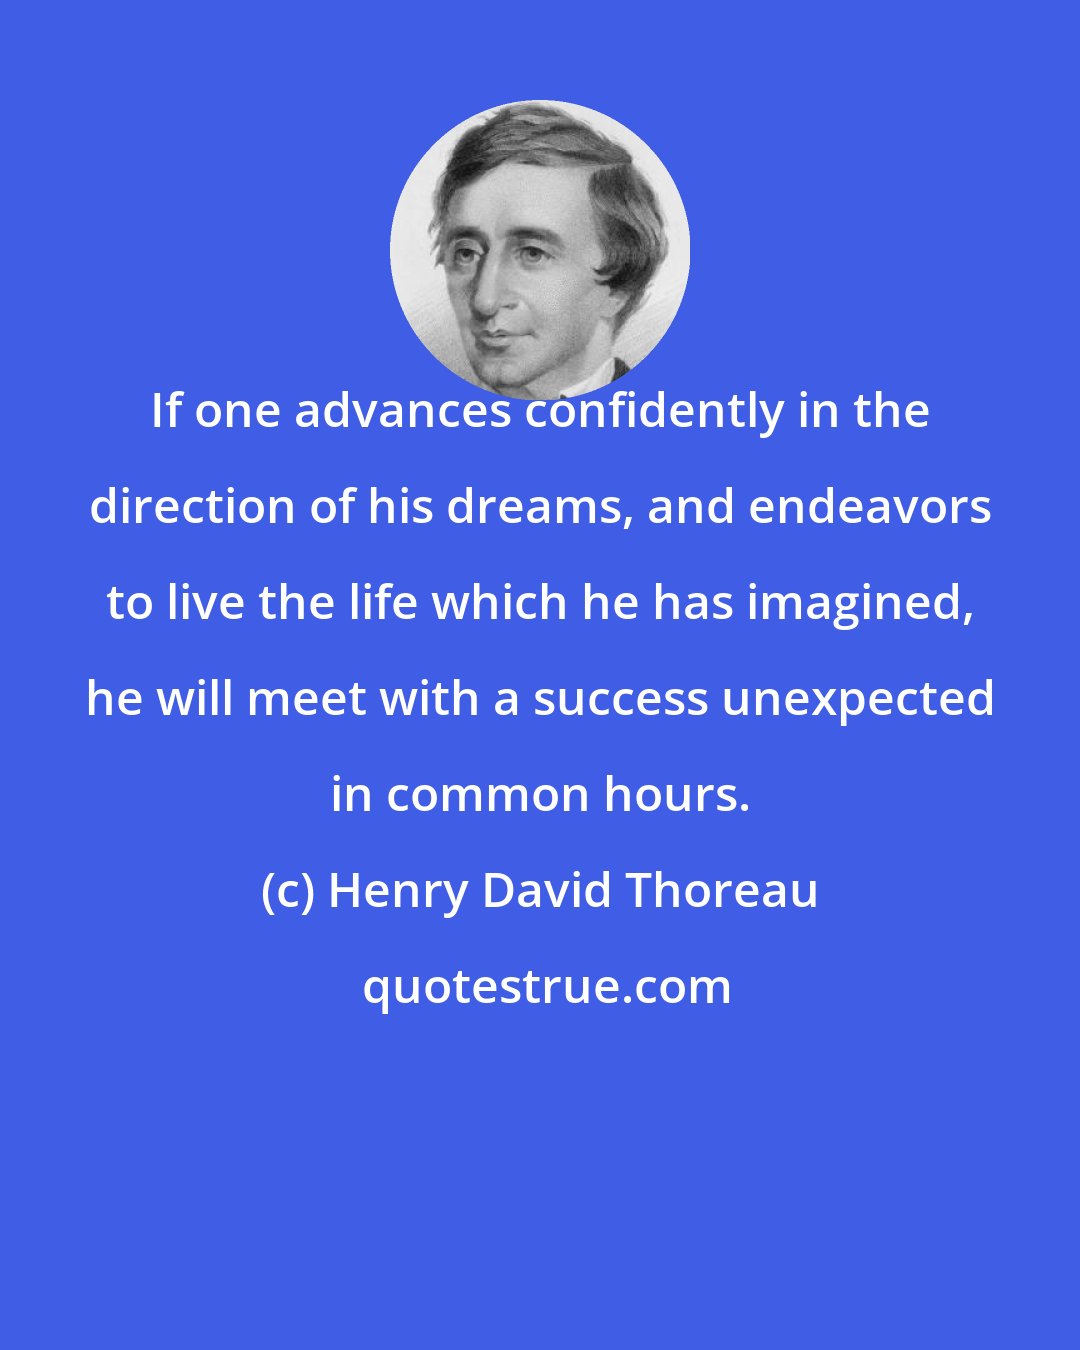 Henry David Thoreau: If one advances confidently in the direction of his dreams, and endeavors to live the life which he has imagined, he will meet with a success unexpected in common hours.